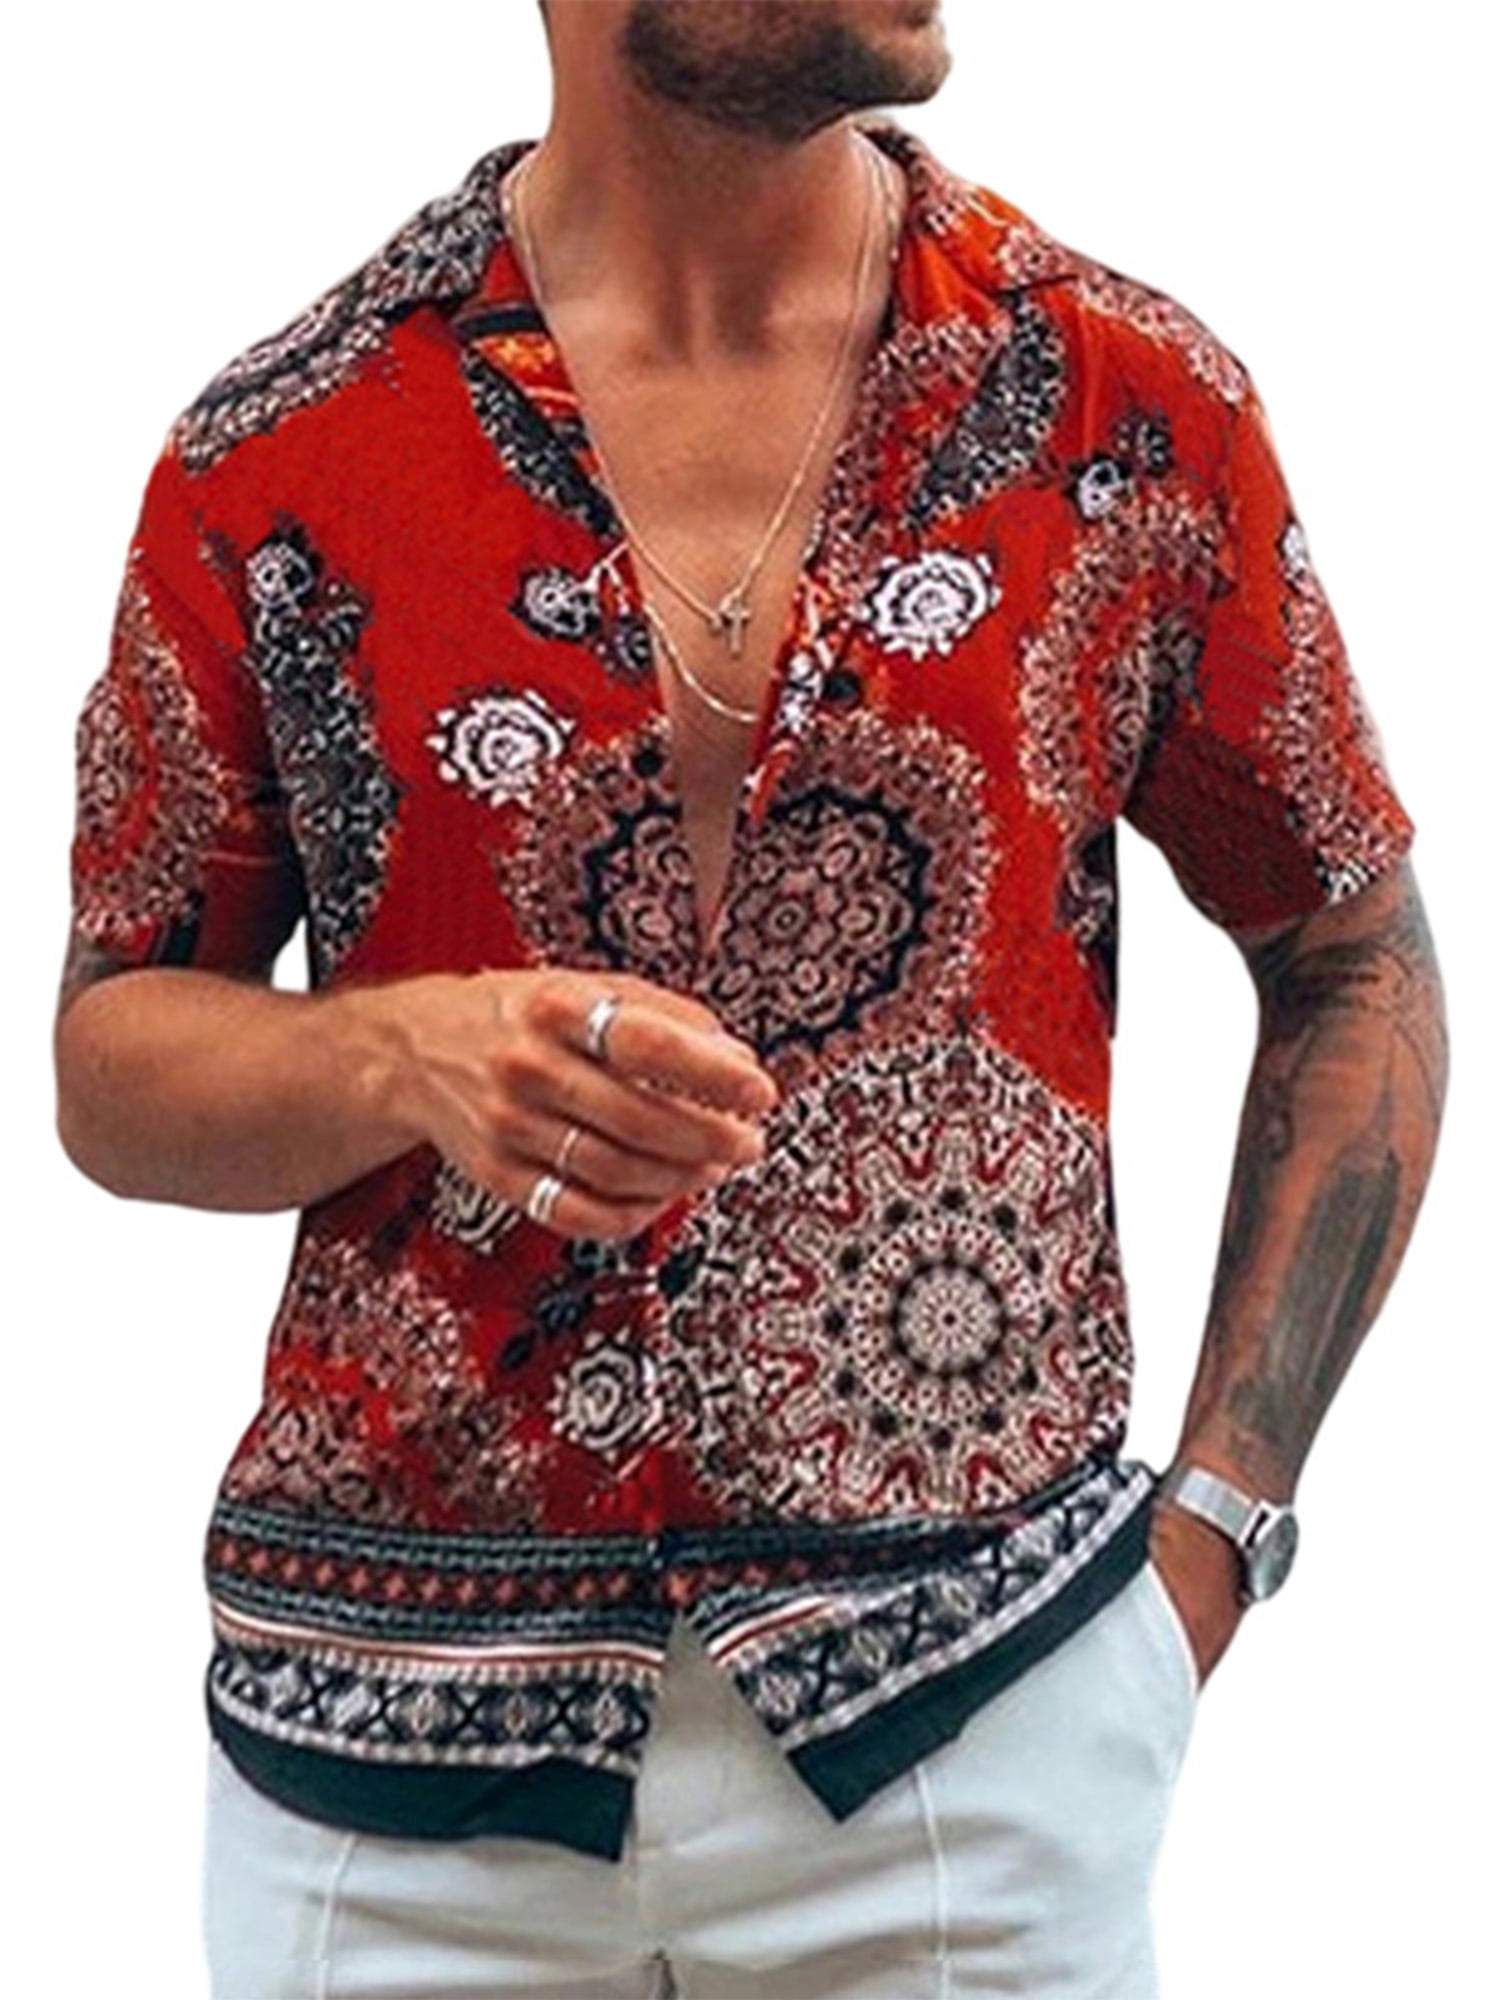 Men Hipster Floral Print Loose Fit Long Sleeve Casual Button Down Dress Shirt